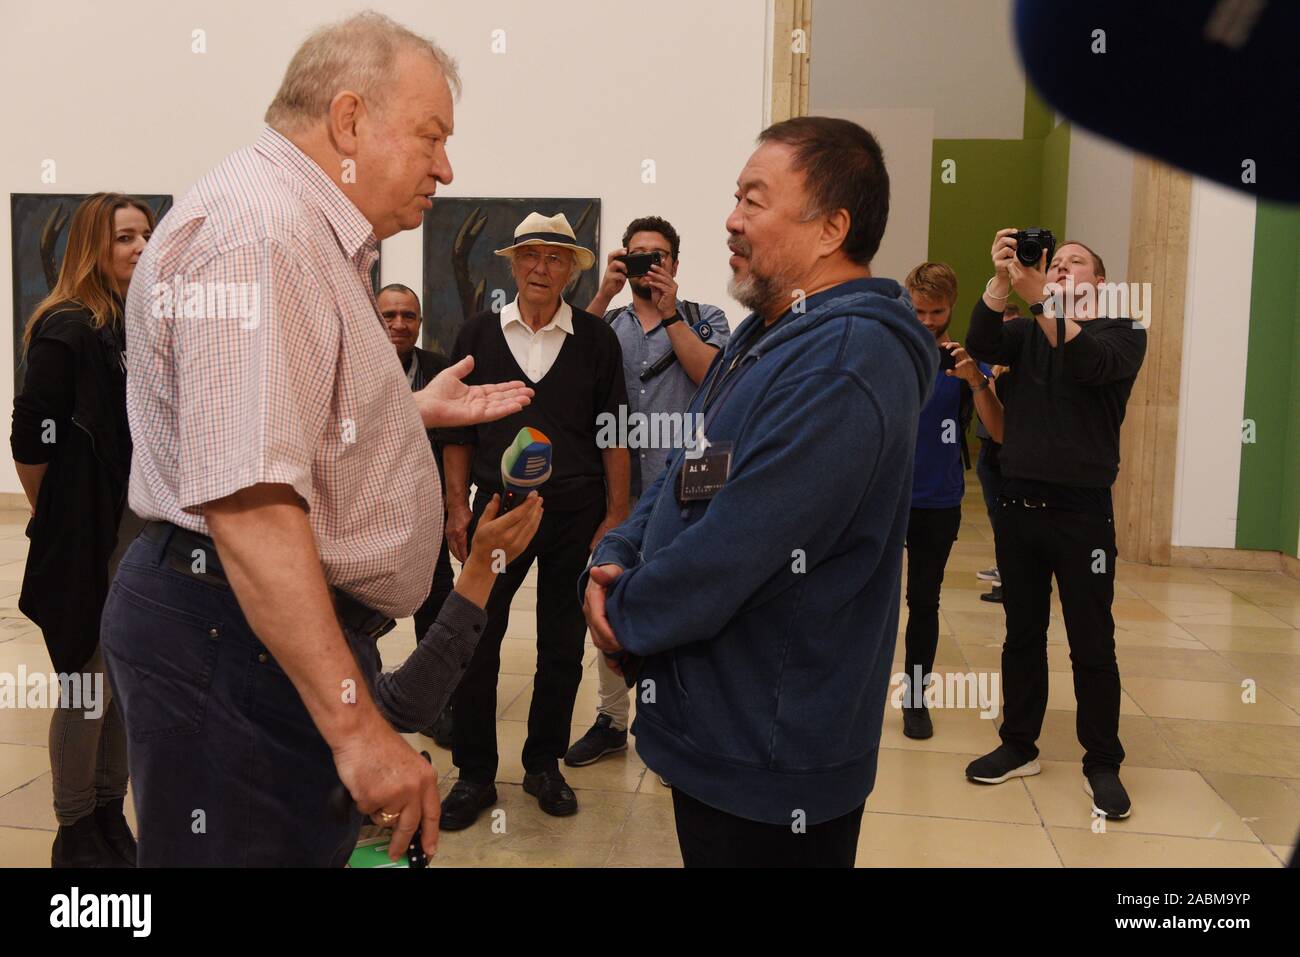 Ai Weiwei (r.) at a protest by the works council at Haus der Kunst against the planned staff reduction by outsourcing the areas of supervision, cash desk and gate. The picture shows the Chinese artist in conversation with Haus der Kunst managing director Bernhard Spies, who is not enthusiastic about the action. [automated translation] Stock Photo